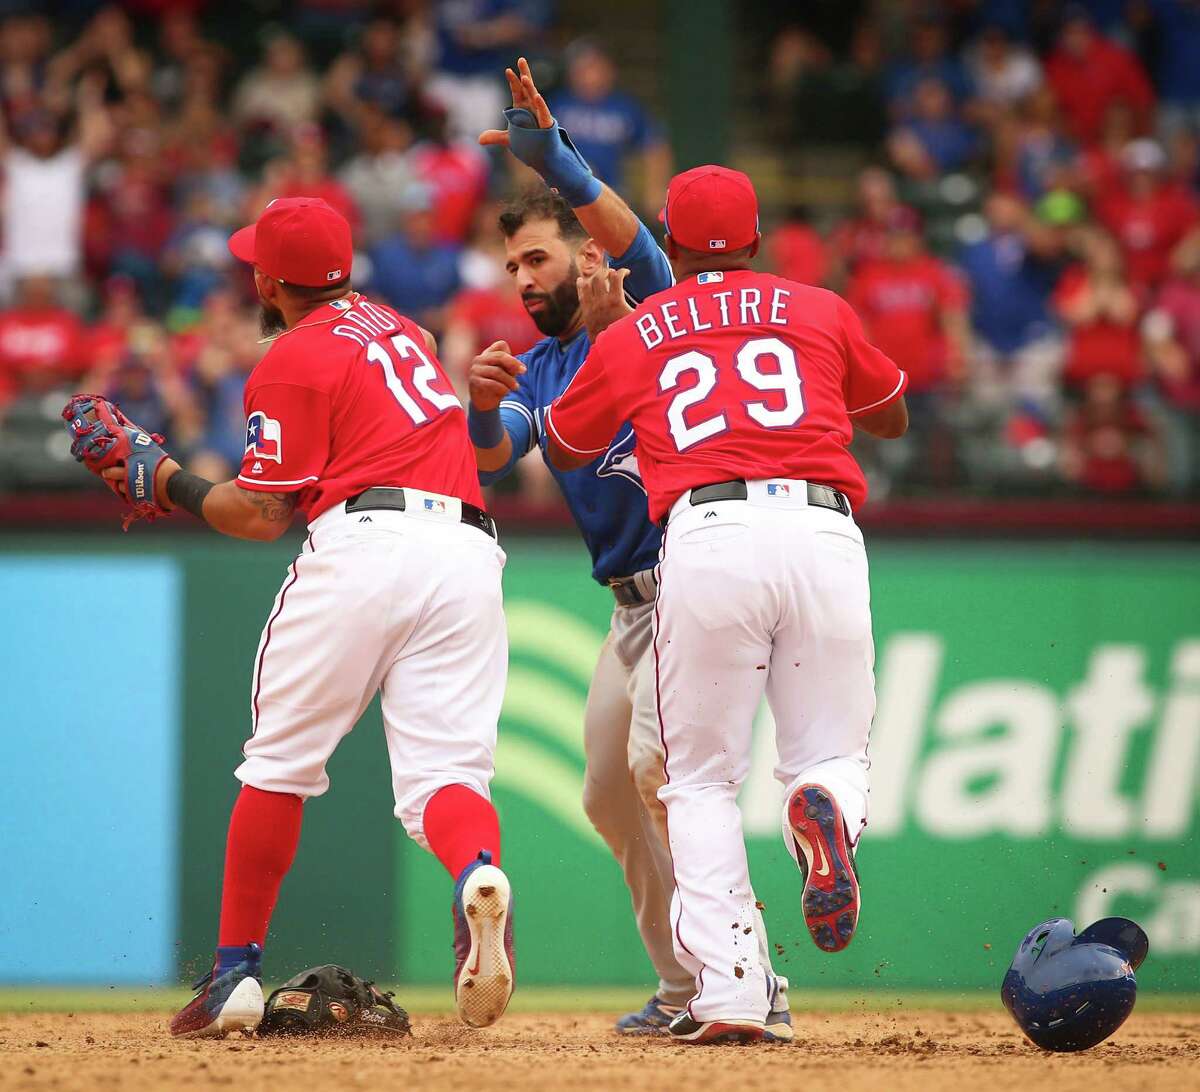 Rougned Odor’s punch to the face of Toronto’s Jose Bautista on Sunday was cheered by many. Texas Rangers second baseman Rougned Odor (12) and Toronto Blue Jays Jose Bautista (19) fight as third baseman Adrian Beltre (29) moves to break it up in the 8th inning at Globe Life Park on May 15, 2016 in Arlington, Texas. The Rangers won 7-6. (Richard W. Rodriguez/Fort Worth Star-Telegram/TNS)